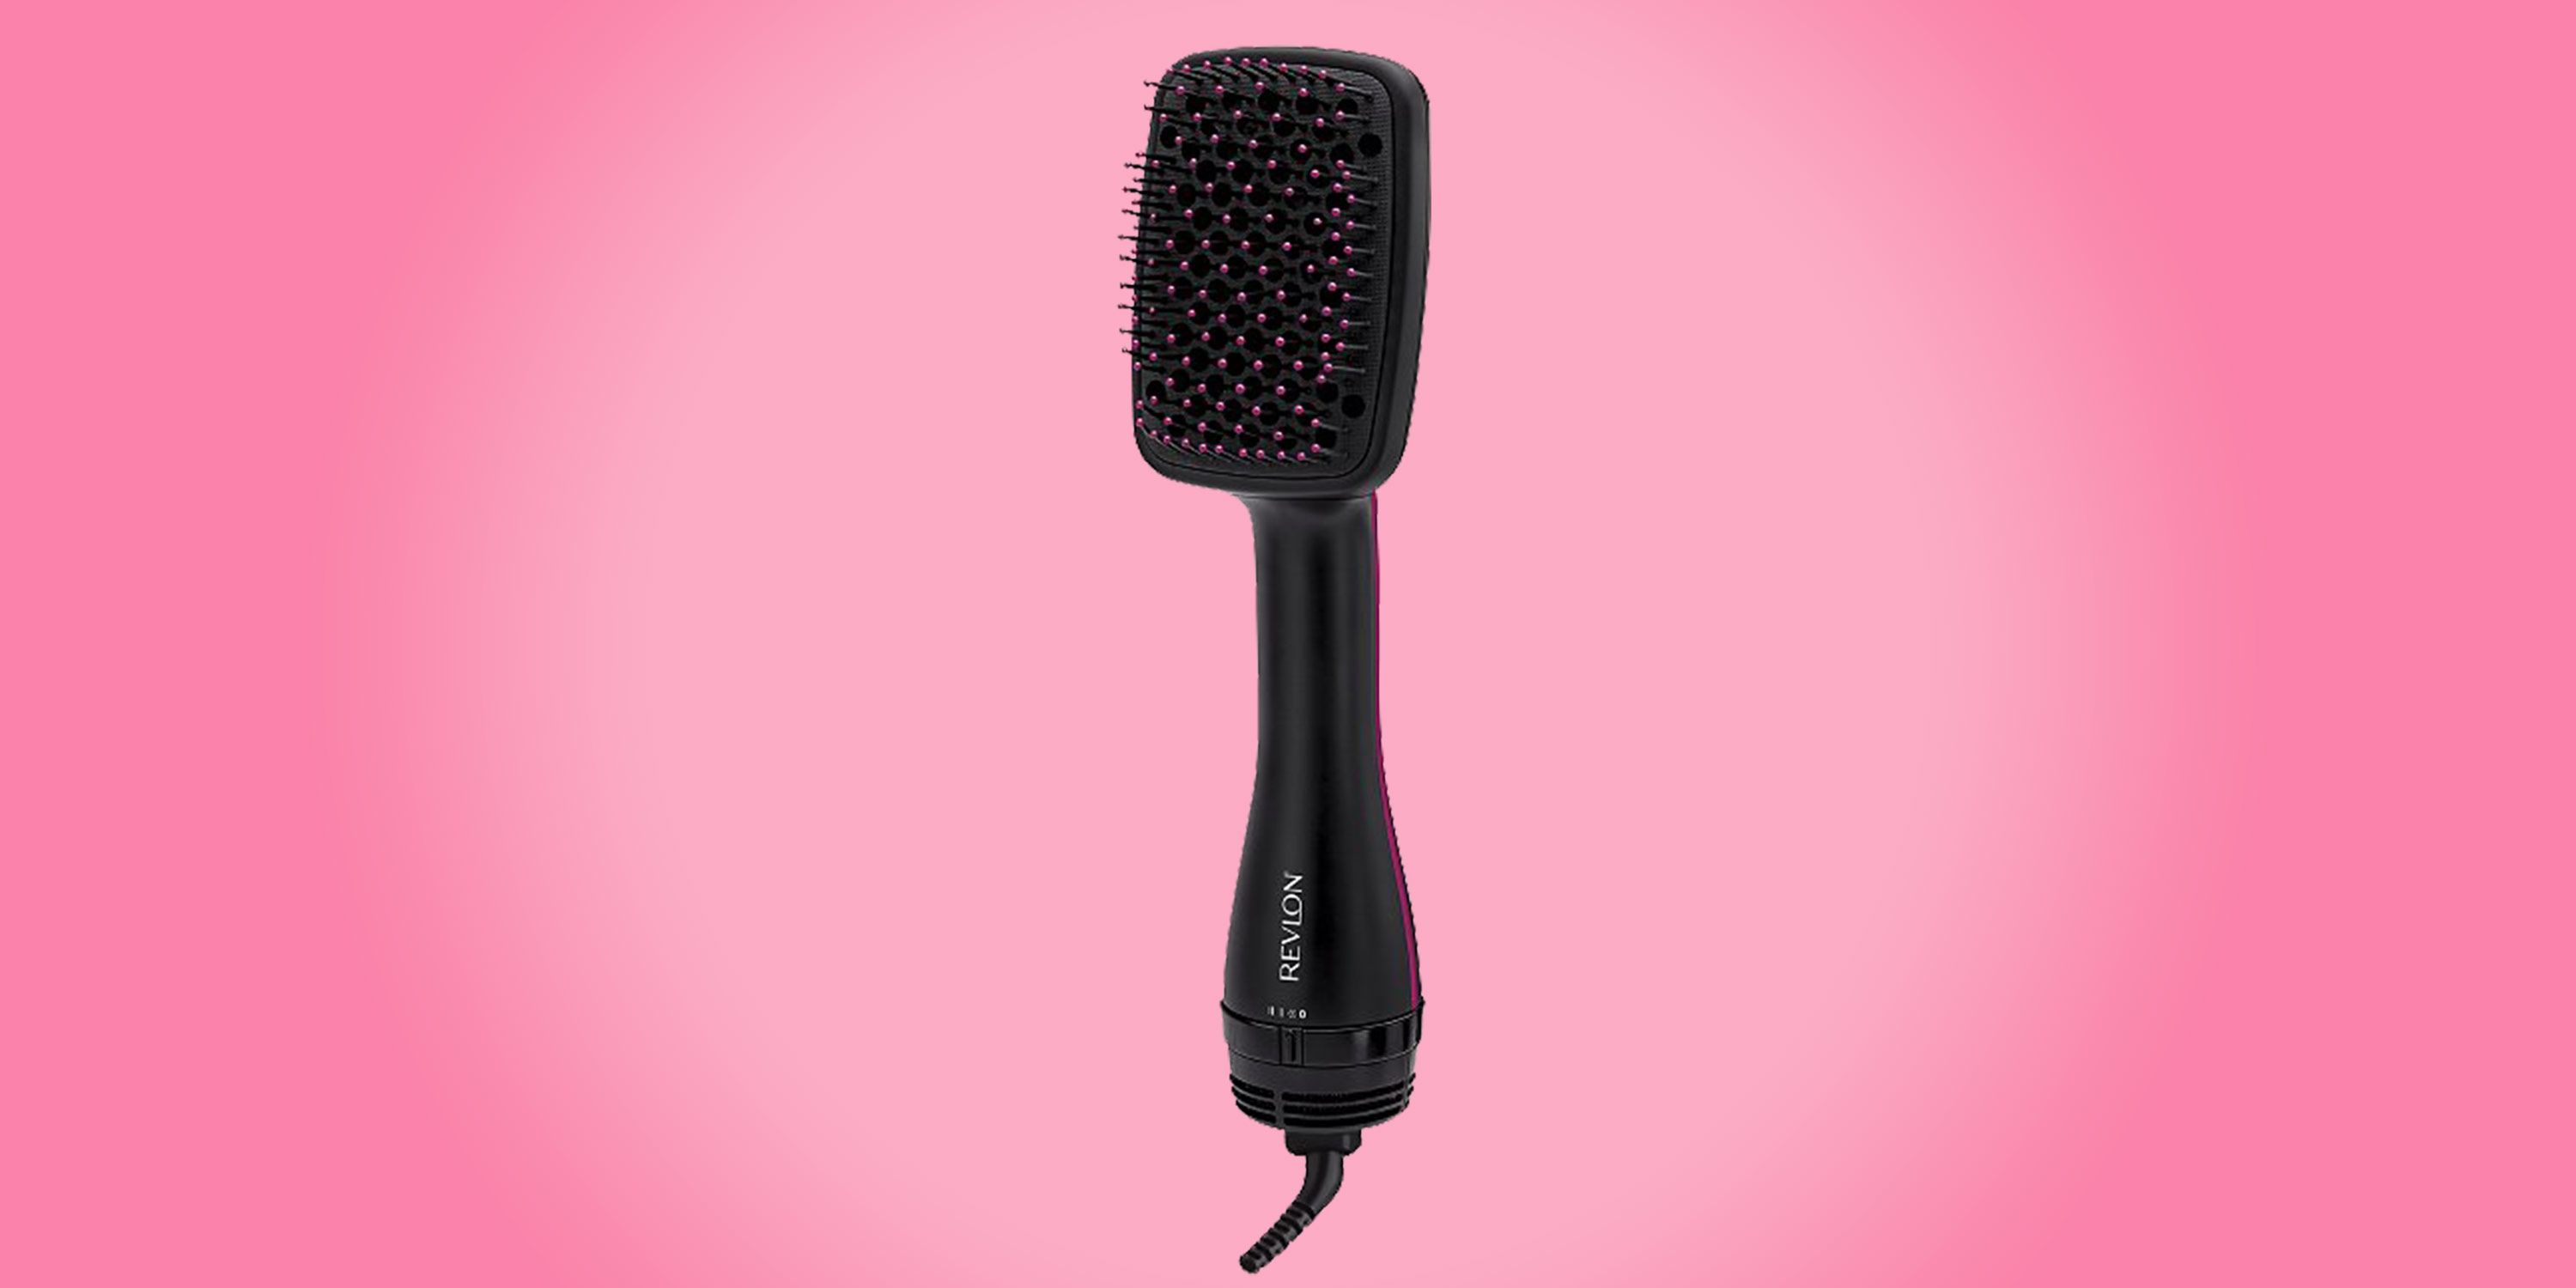 Revlon Blow Dryer Brush Editor Review & How to Use It